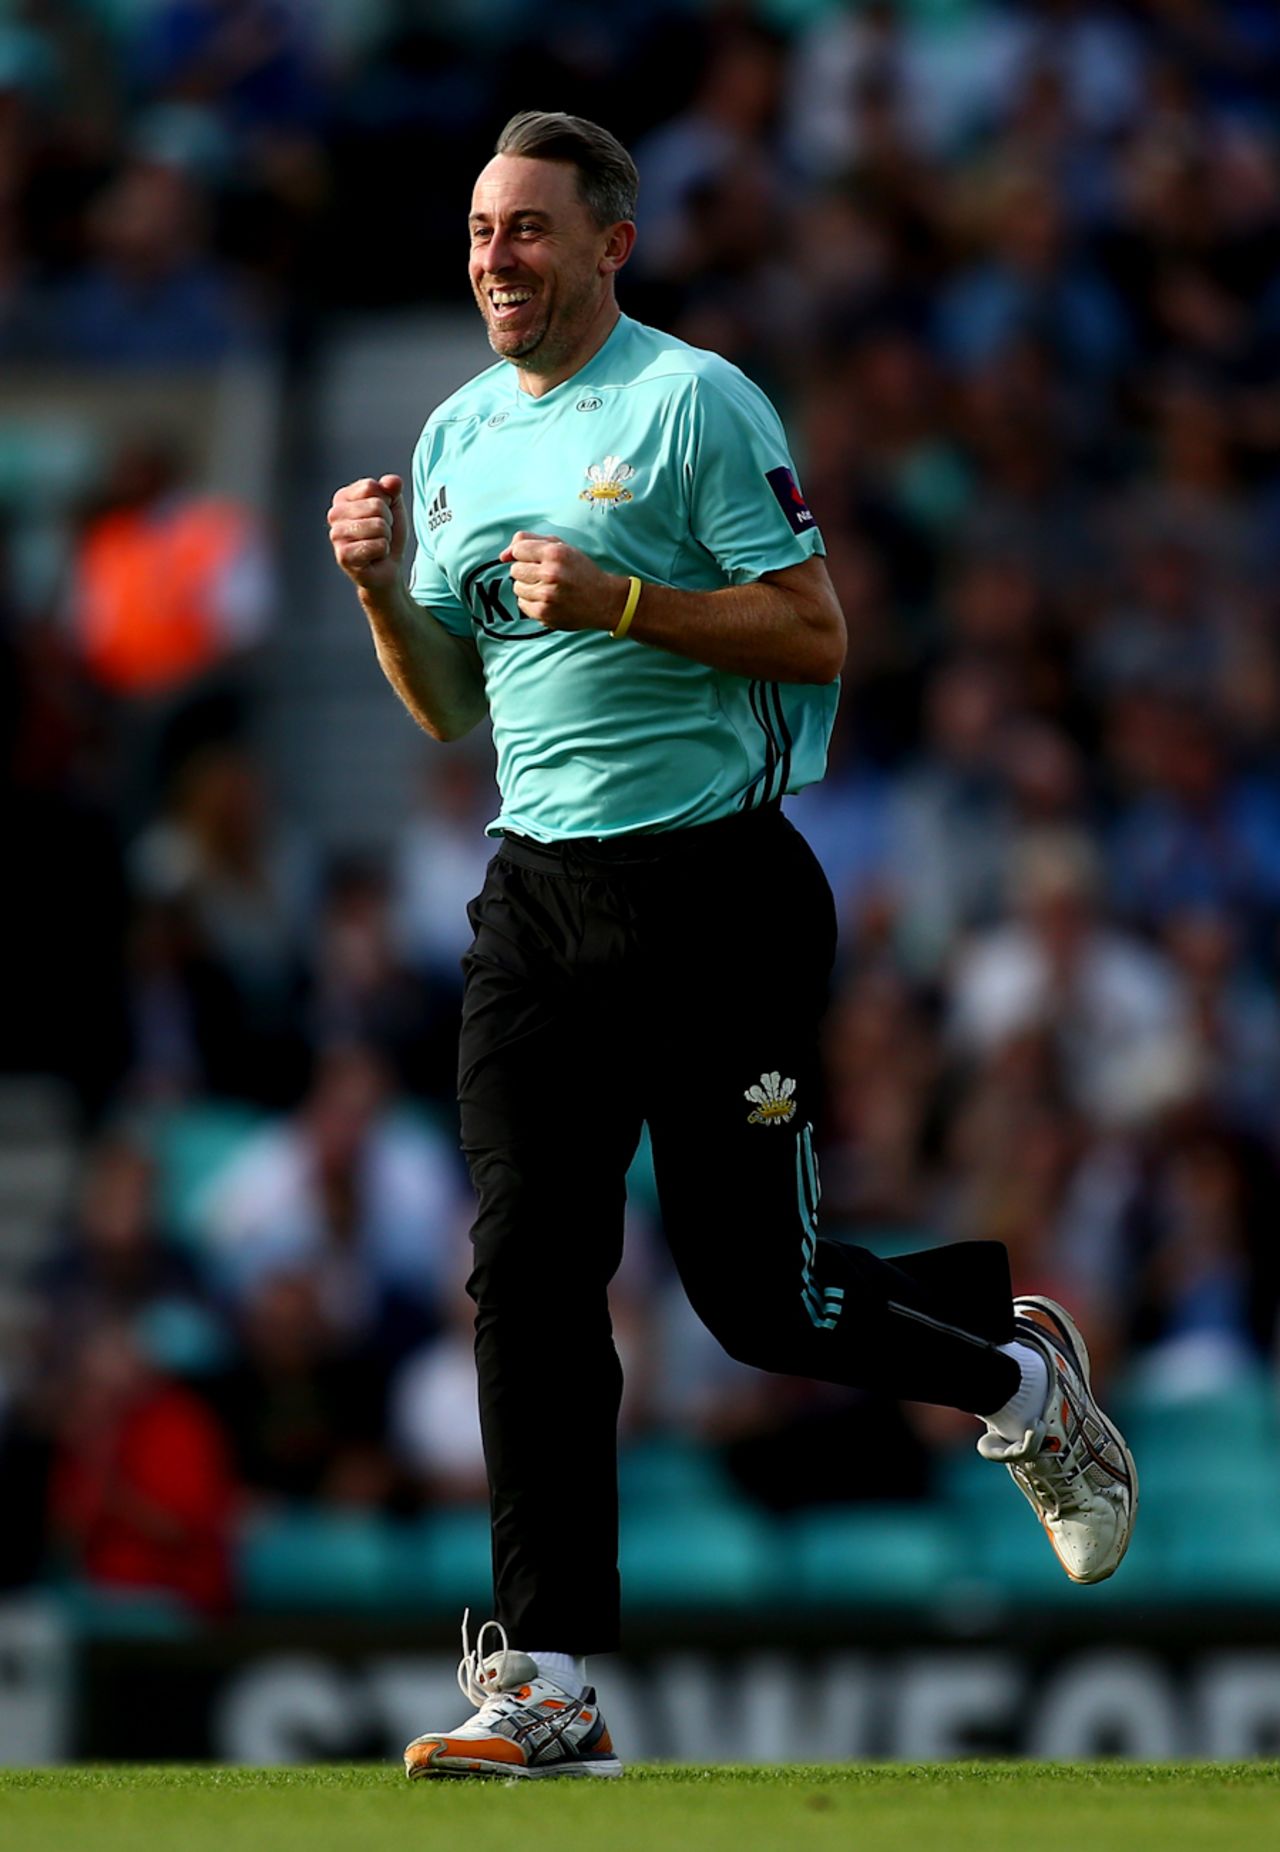 Rikki Clarke runs out at Kia Oval to start the second phase of his Surrey career, Surrey v Glamorgan, NatWest Blast, South Group, Kia Oval, August 4, 2017